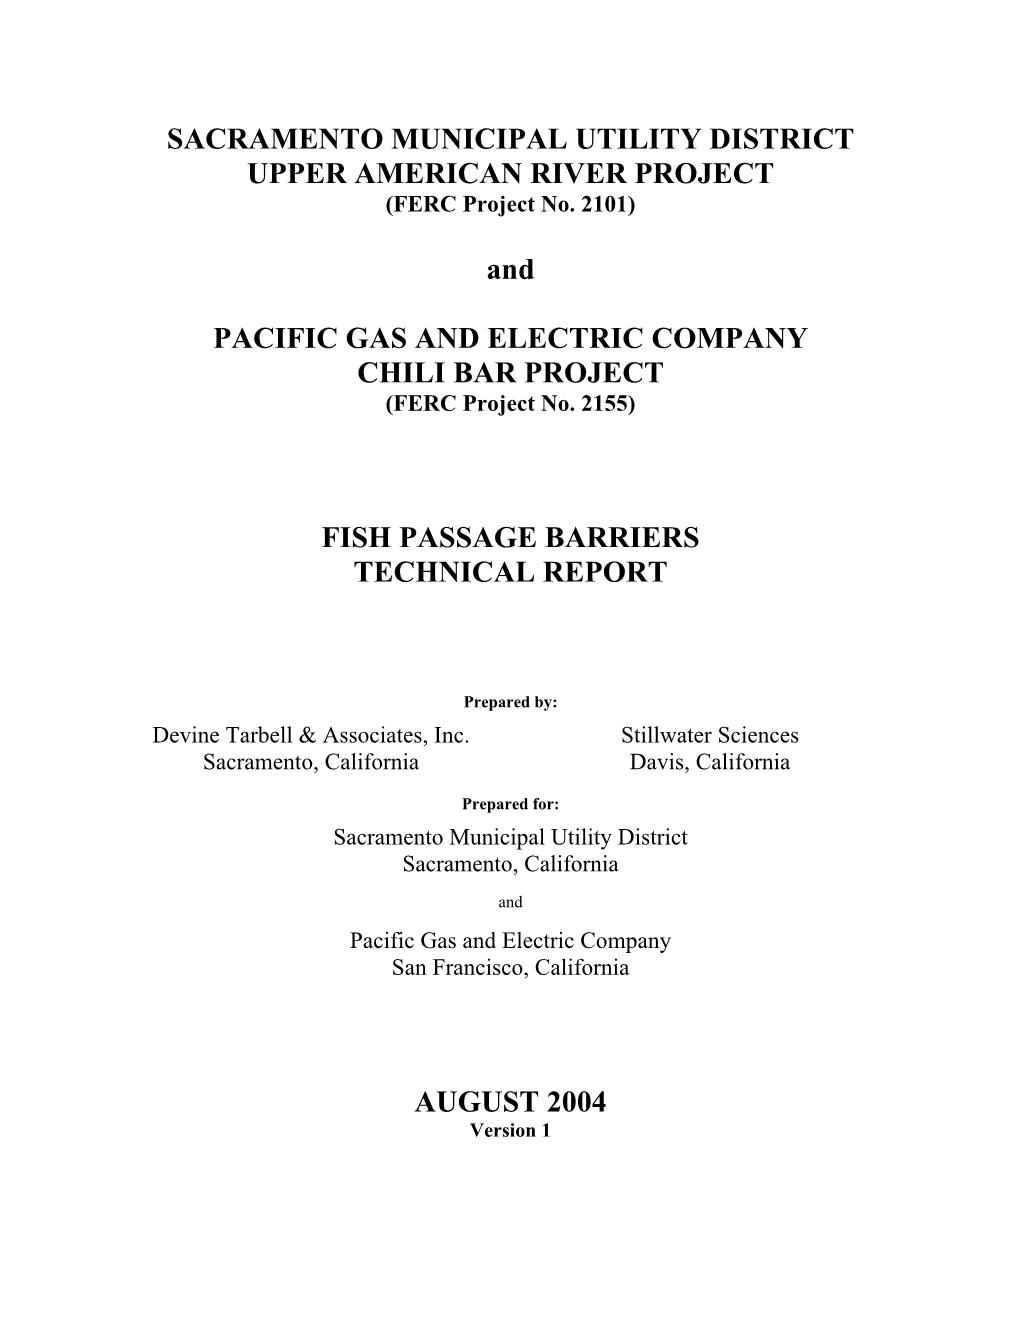 Fish Passage Barriers Technical Report, August 2004, Version 1